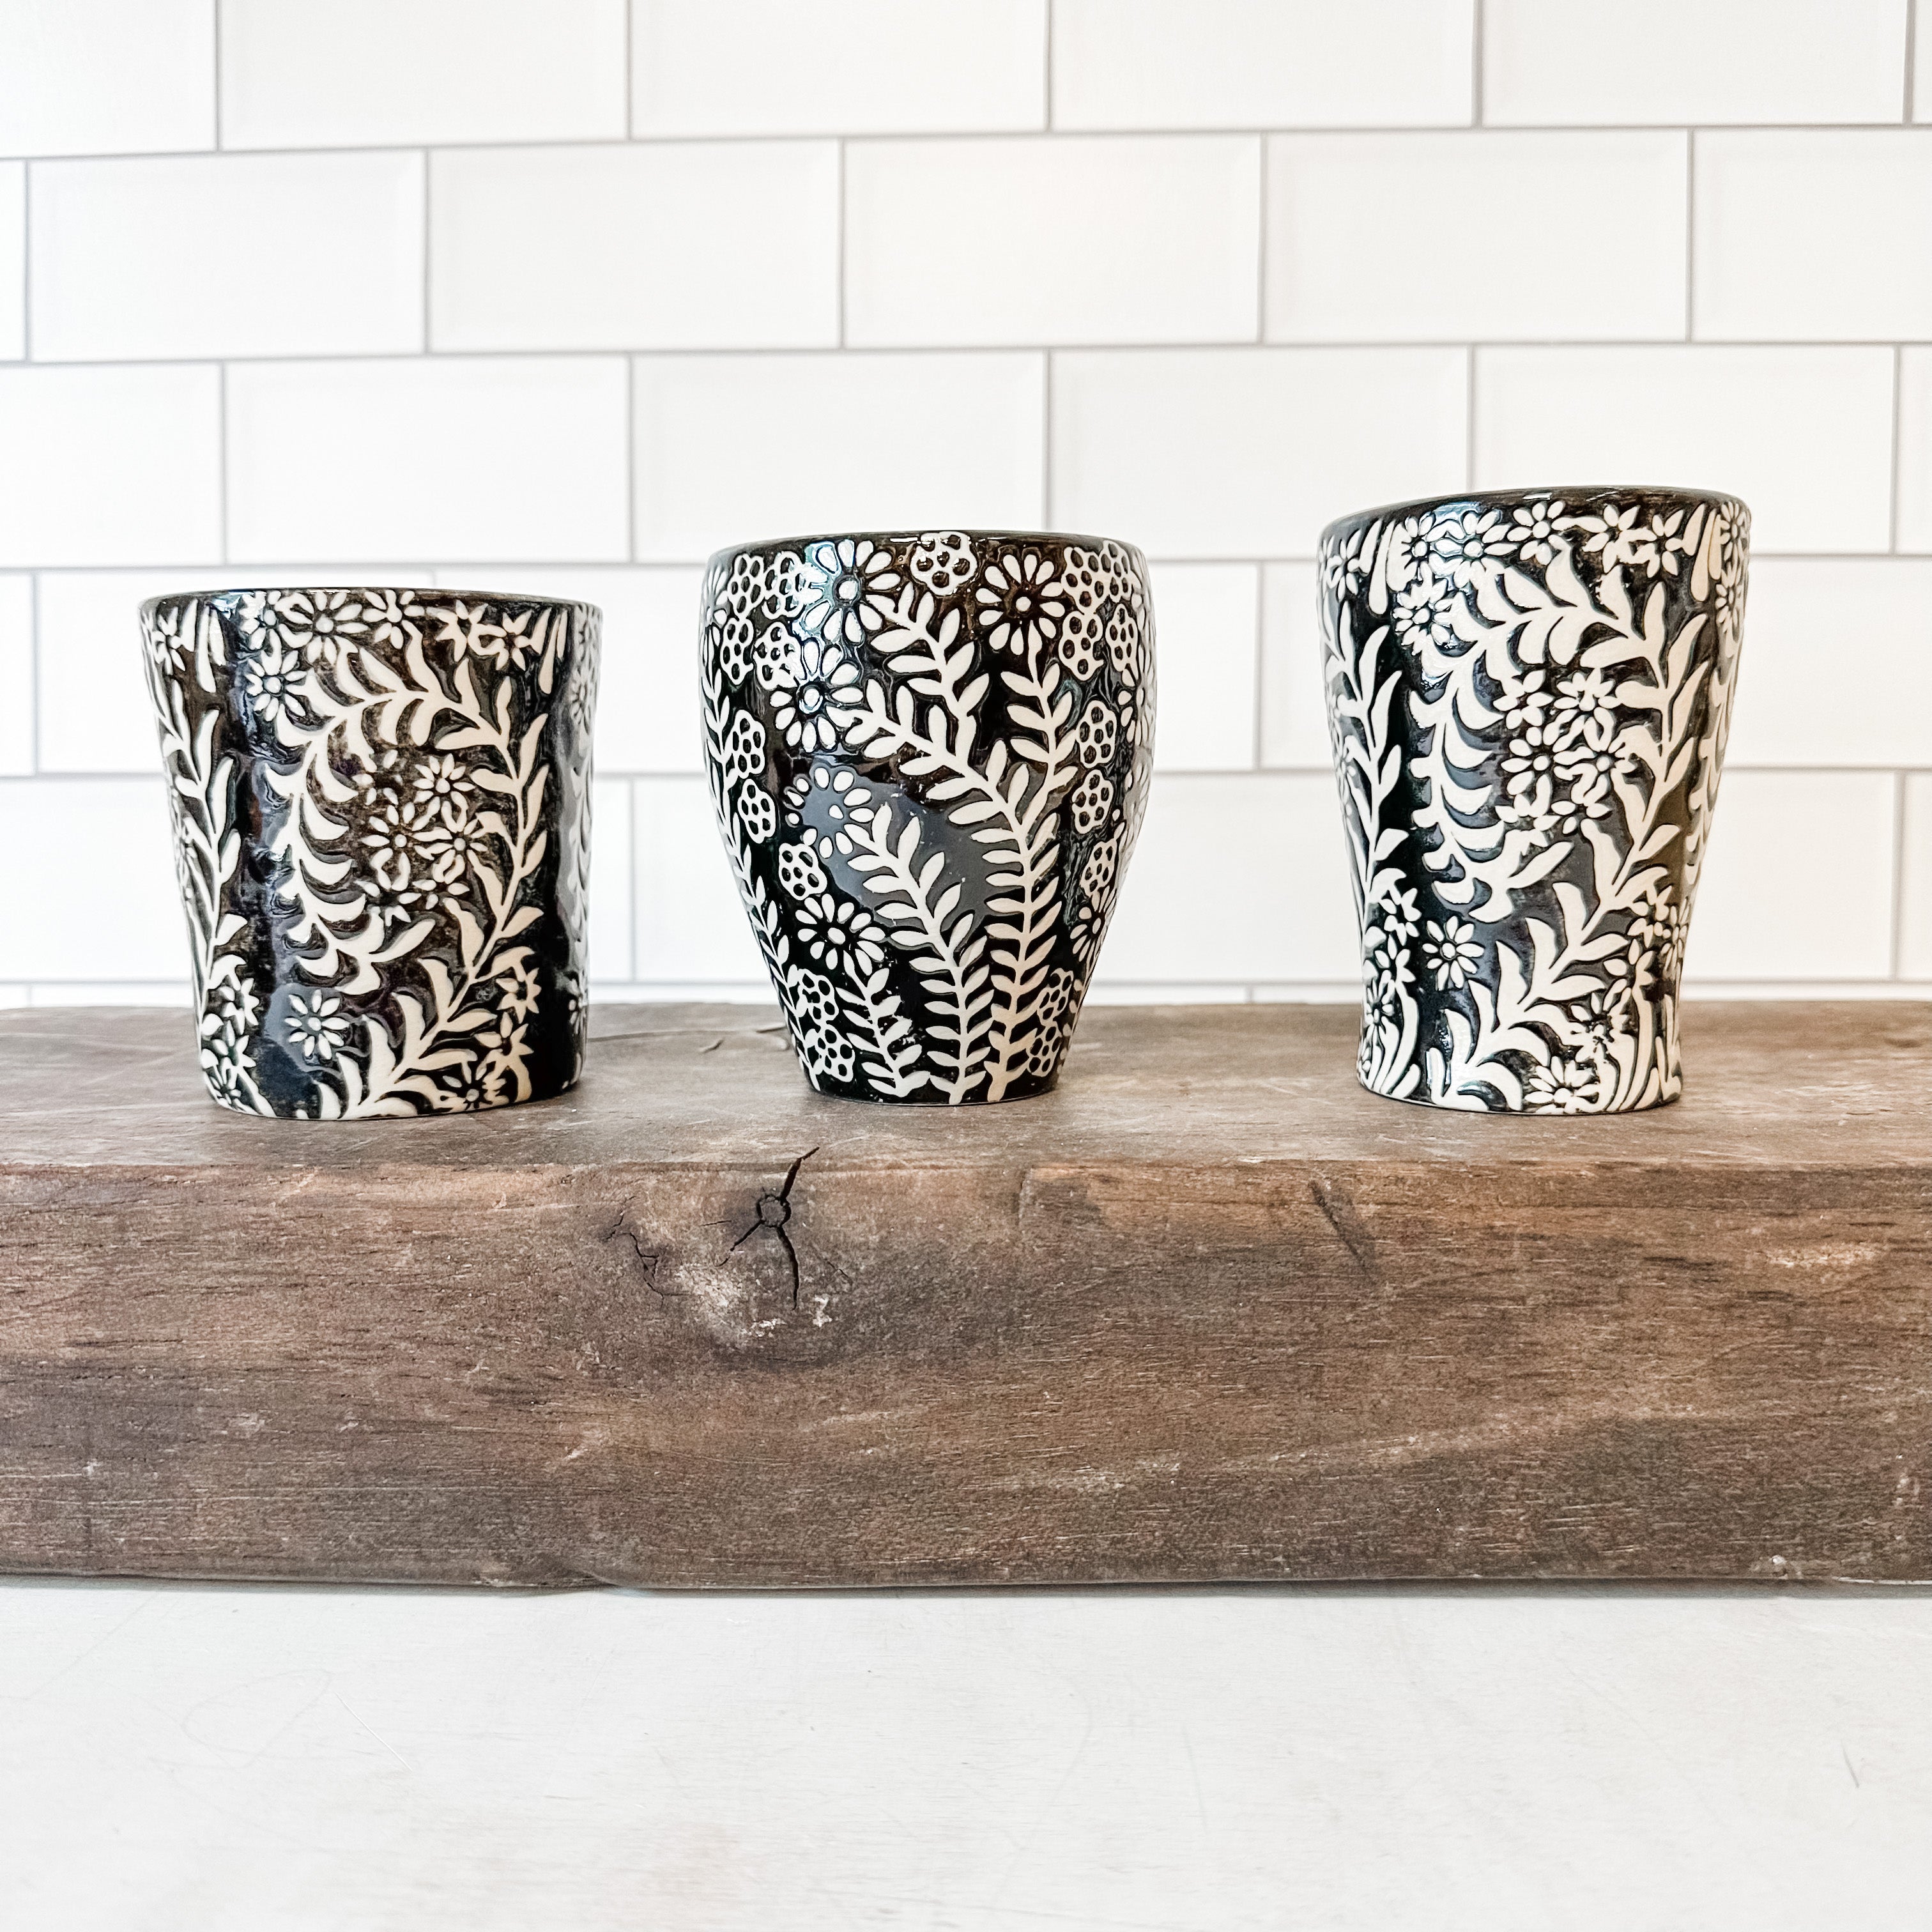 Stoneware Cups With Floral Design, Black